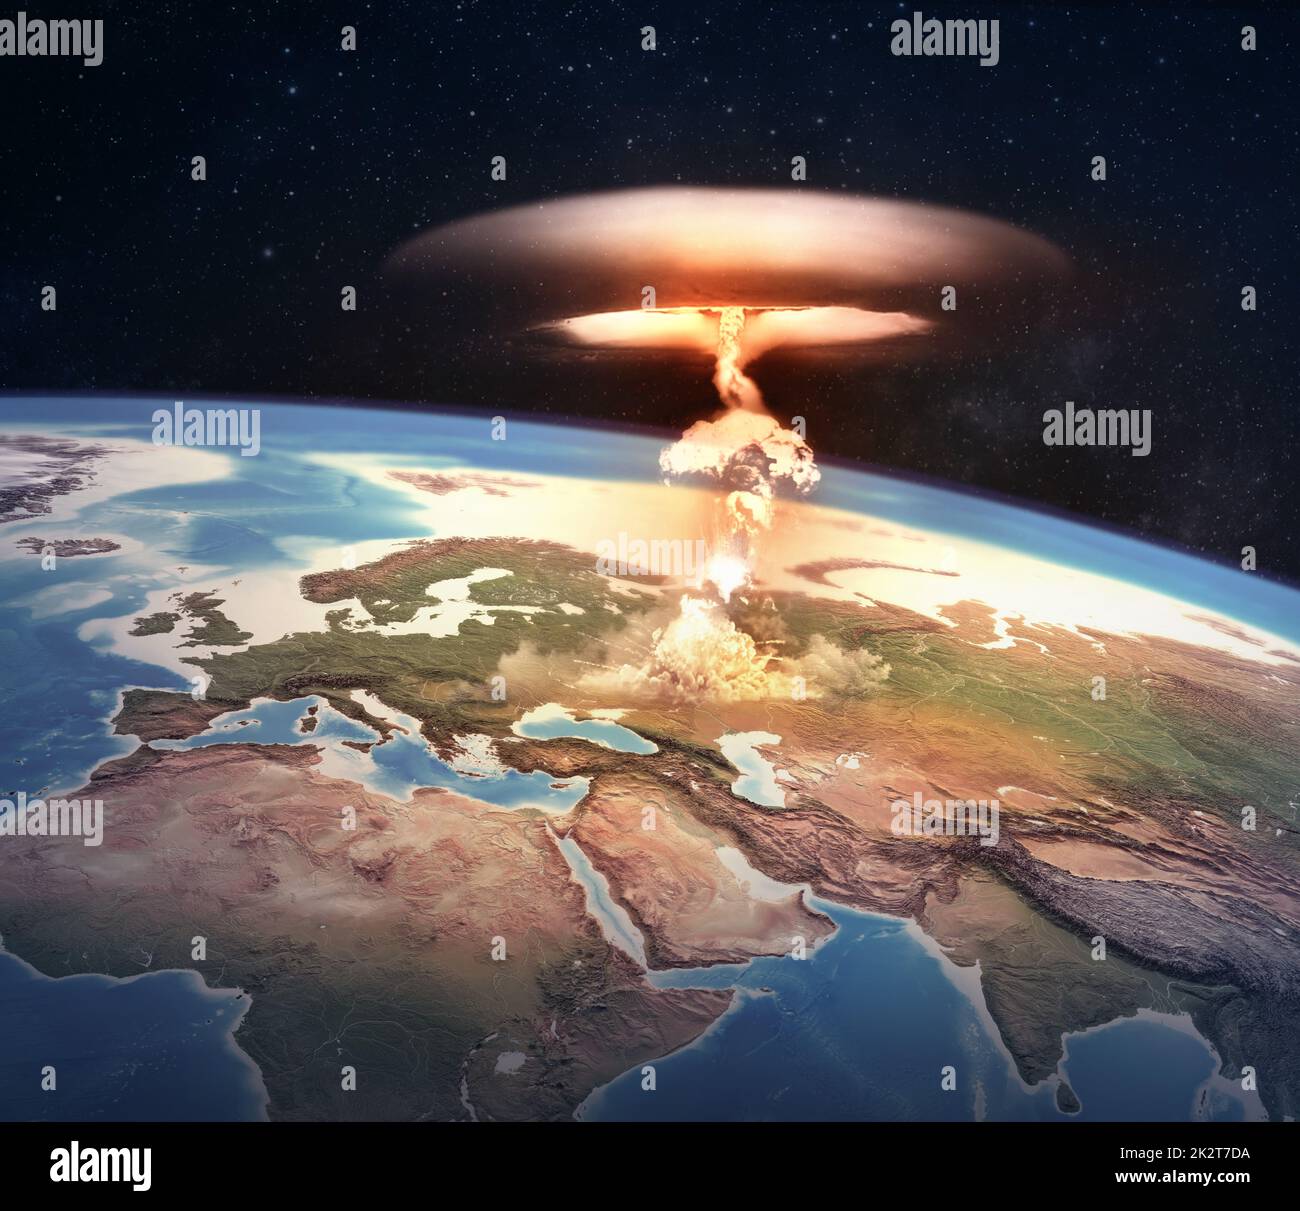 Atomic bomb explosion on Europe. Nuclear war starting with a mushroom cloud, dangers of nuclear energy for planet Earth, end of the world. 3D illustra Stock Photo